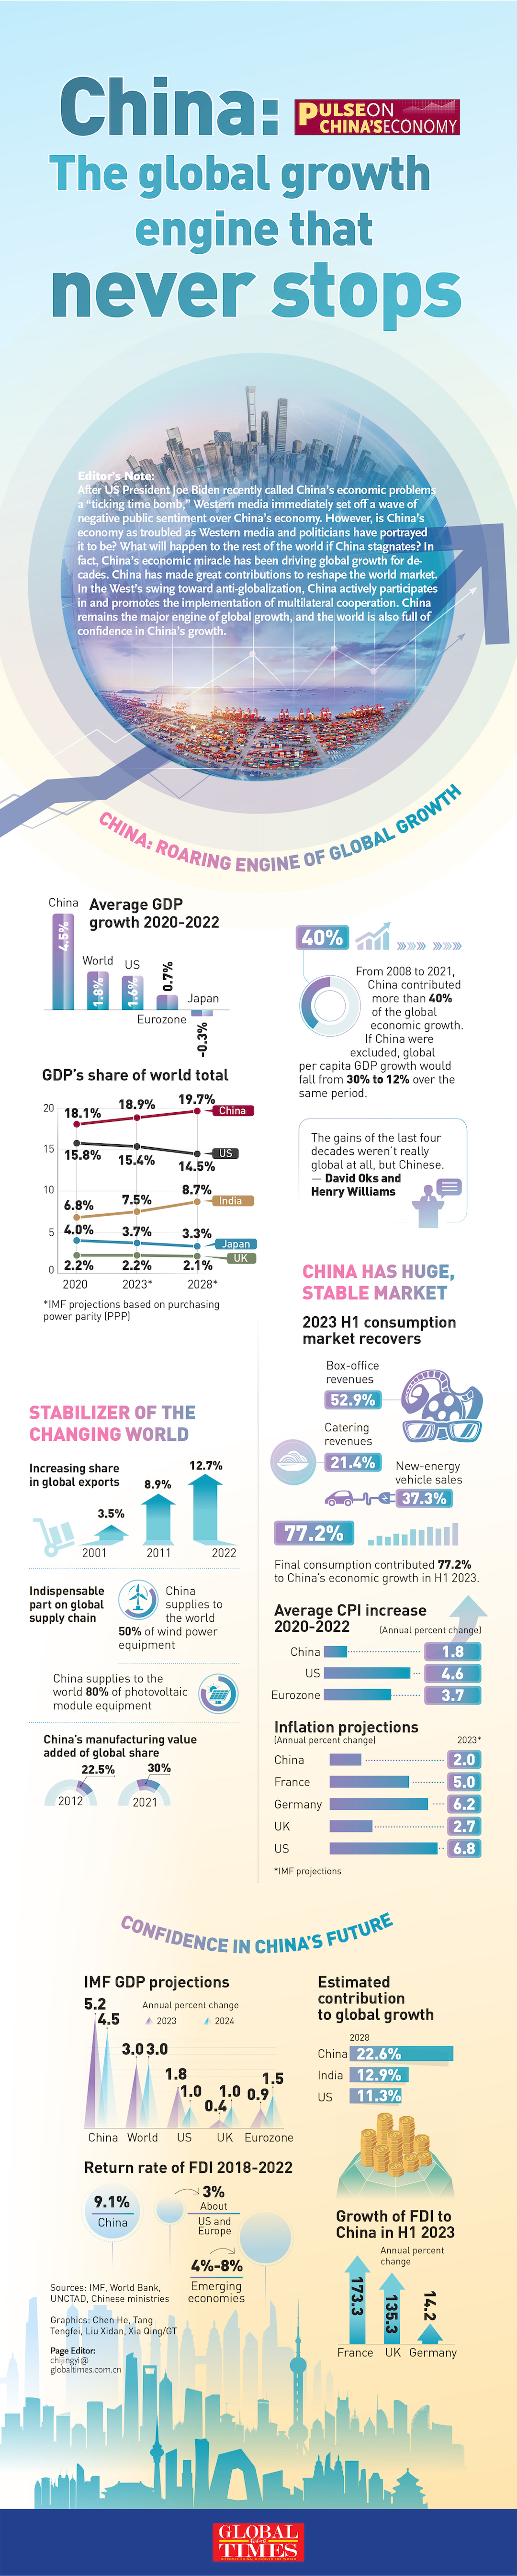 Pulse on China’s economy: China, the engine of global growth, never stops Infographic: GT